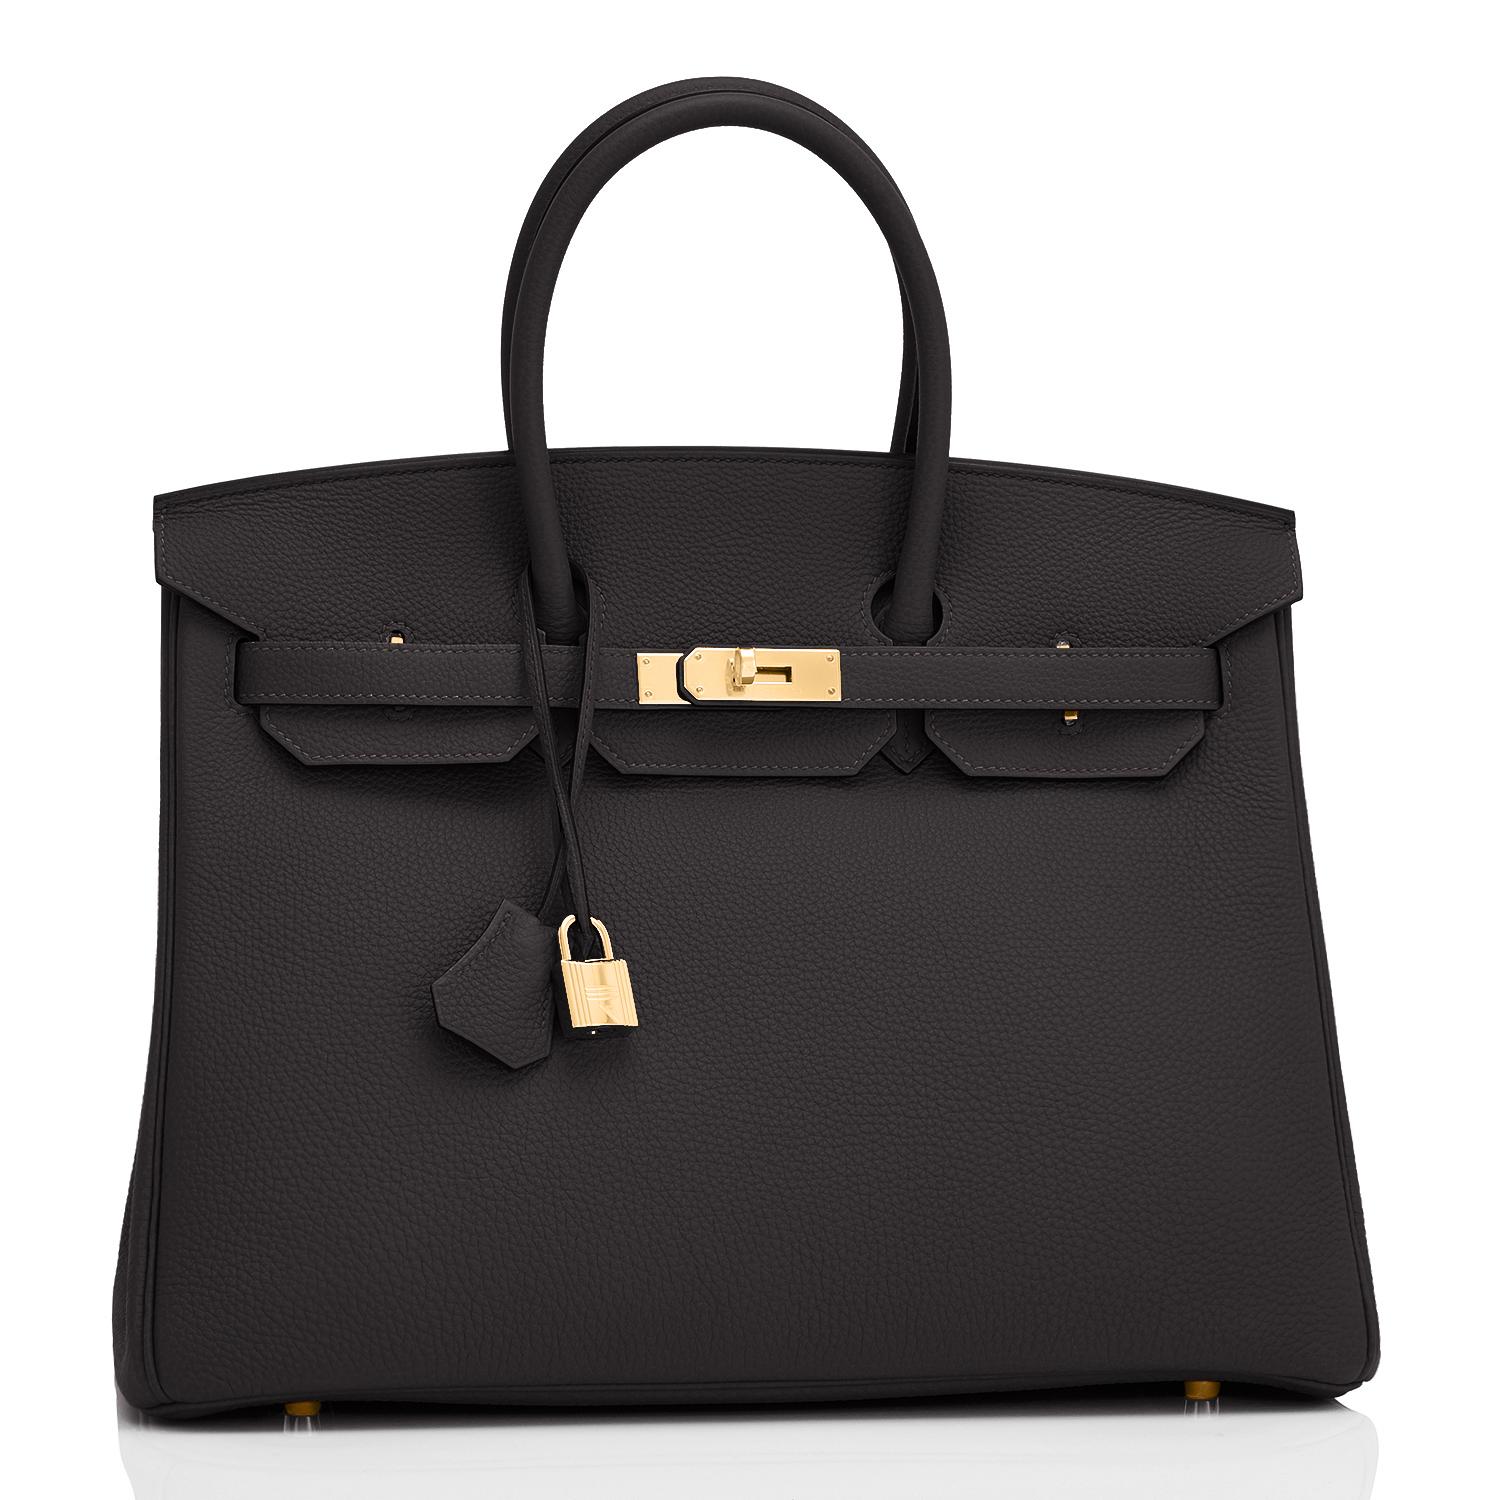 Hermes Birkin 35cm Black Togo Gold Hardware Bag Z Stamp, 2021
Brand New in Box. Store fresh. Pristine Condition (with plastic on hardware).
Just purchased from Hermes store; bag bears new 2021 interior Z stamp.
Perfect gift! Comes with lock, keys,